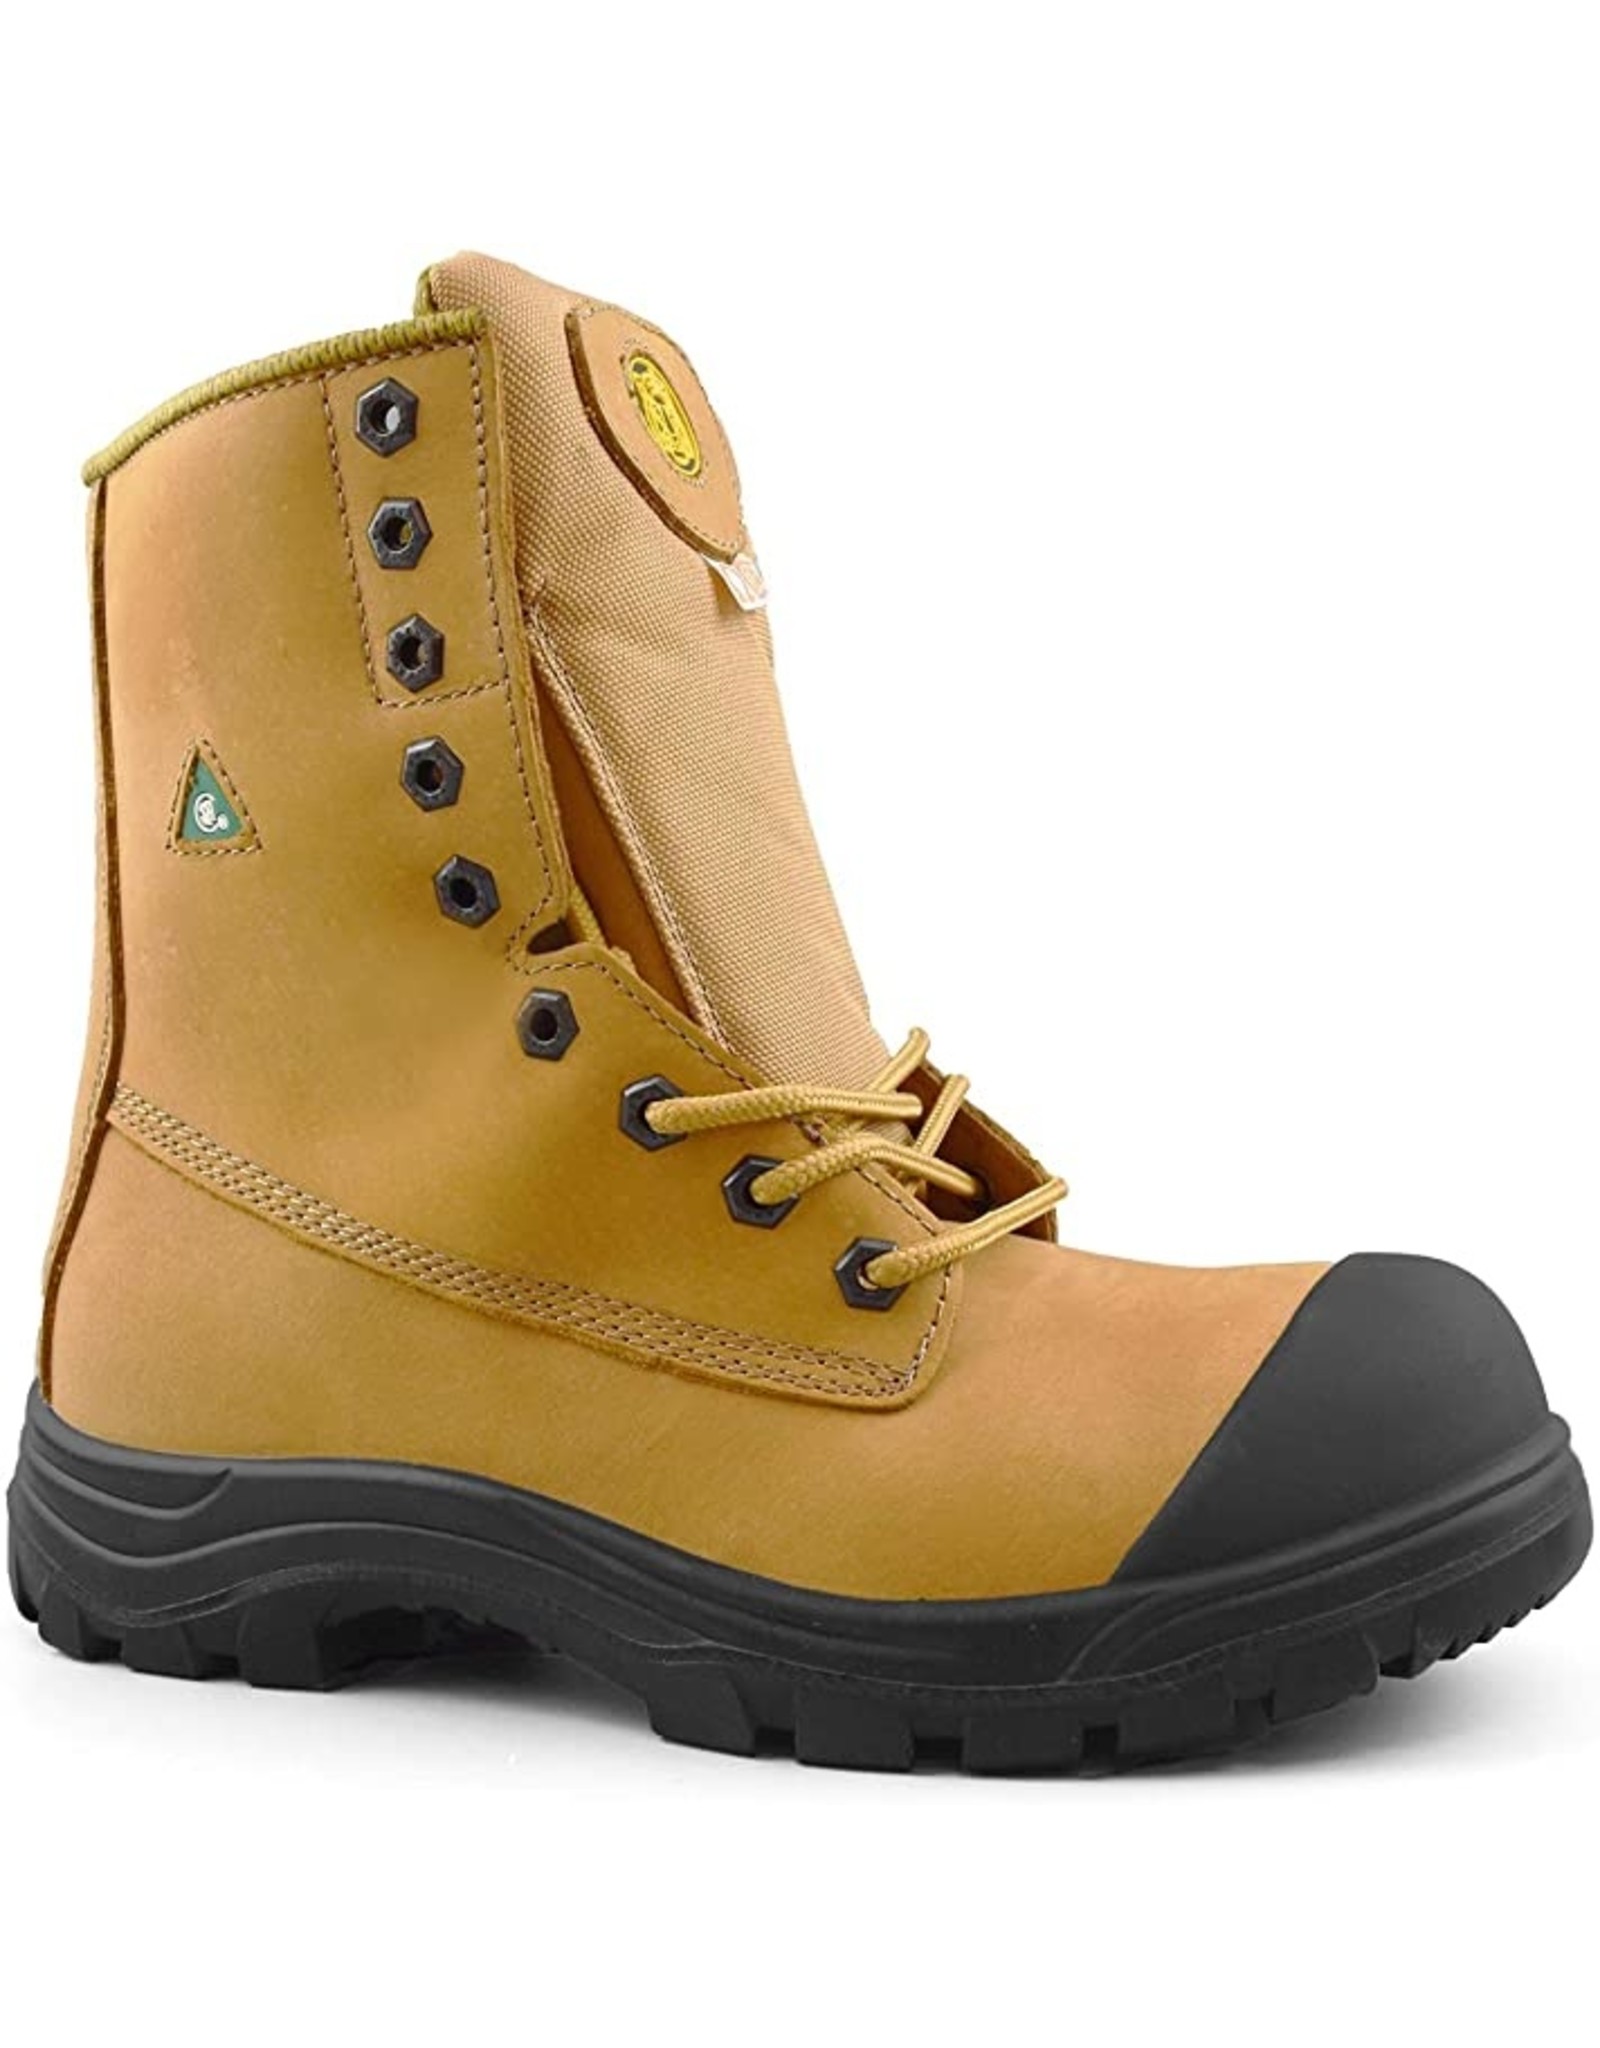 TIGER SAFETY TIGER 3088-W SAFETY BOOT